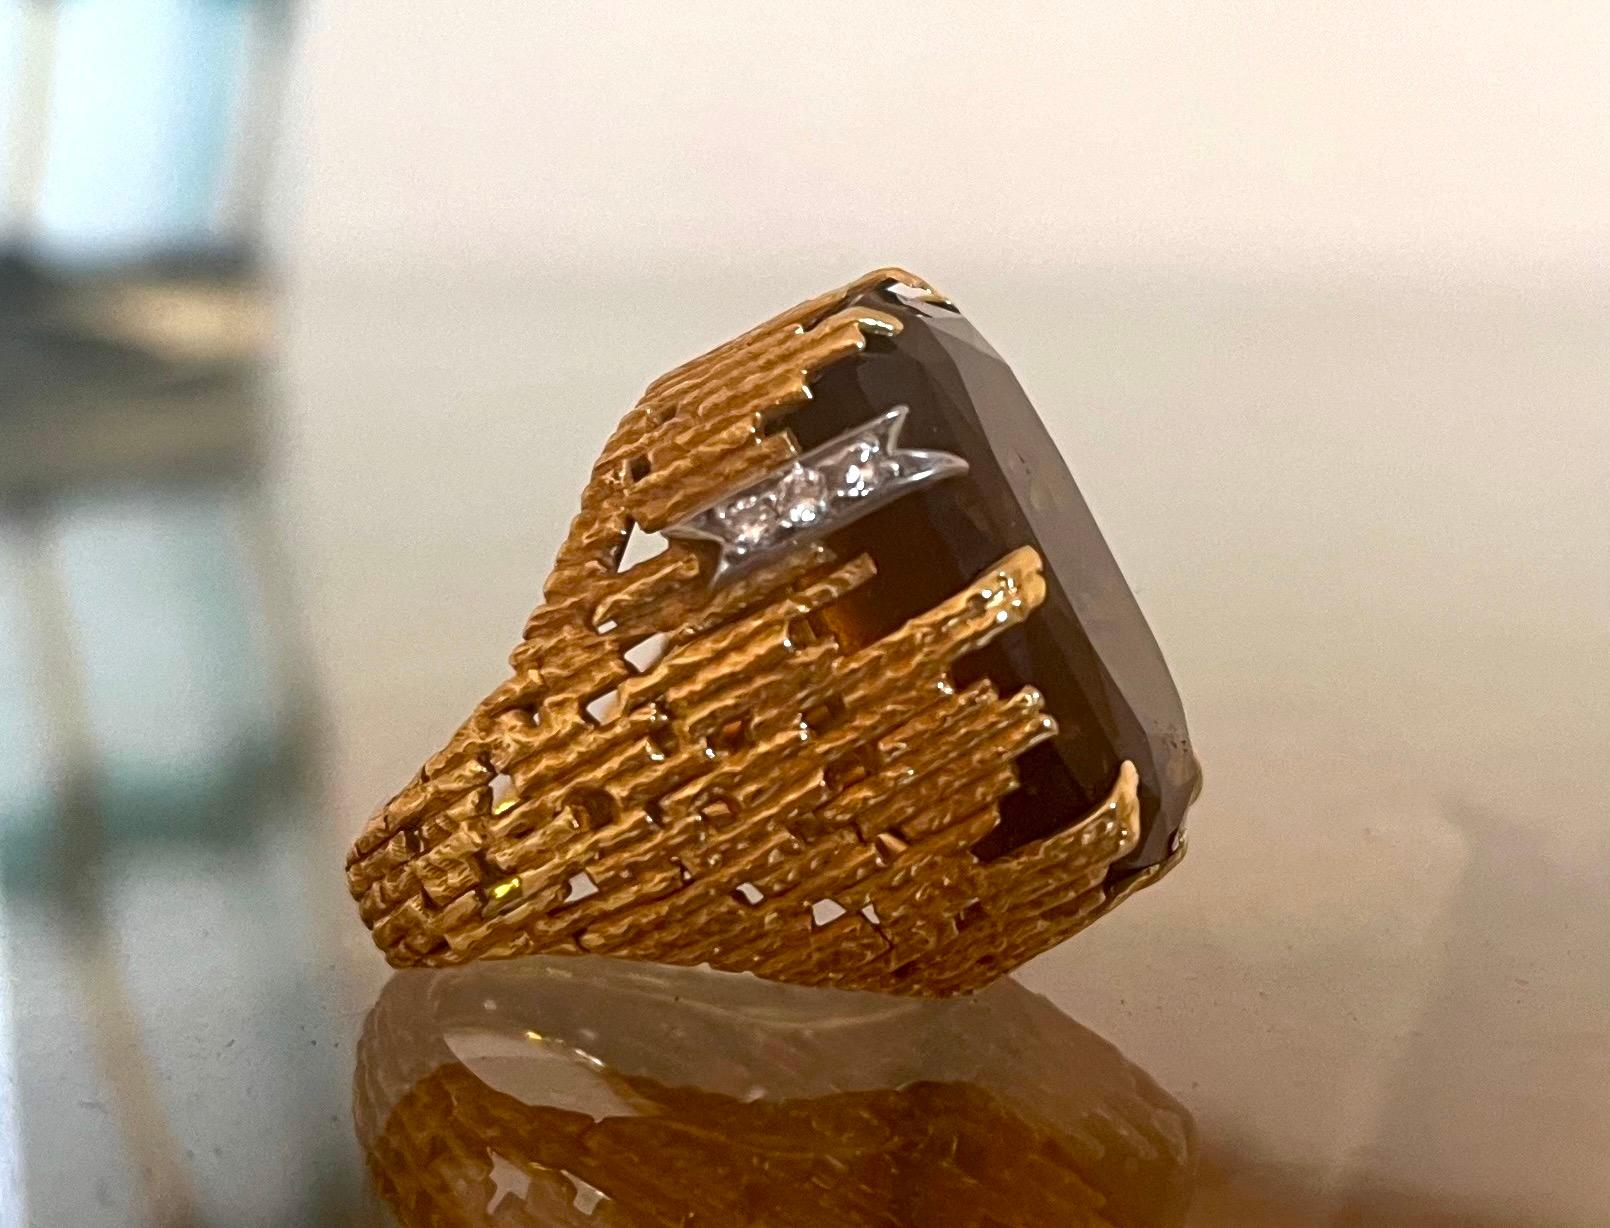 Iconic Modernist Ring by Andrew Grima.

20 carats Cushion Cut Brown Quartz in a 18K Gold textured graphic setting; Signed Grima

Andrew Grima (31 May 1921 – 26 December 2007) was an Anglo-Italian designer who became known as the doyen of modern